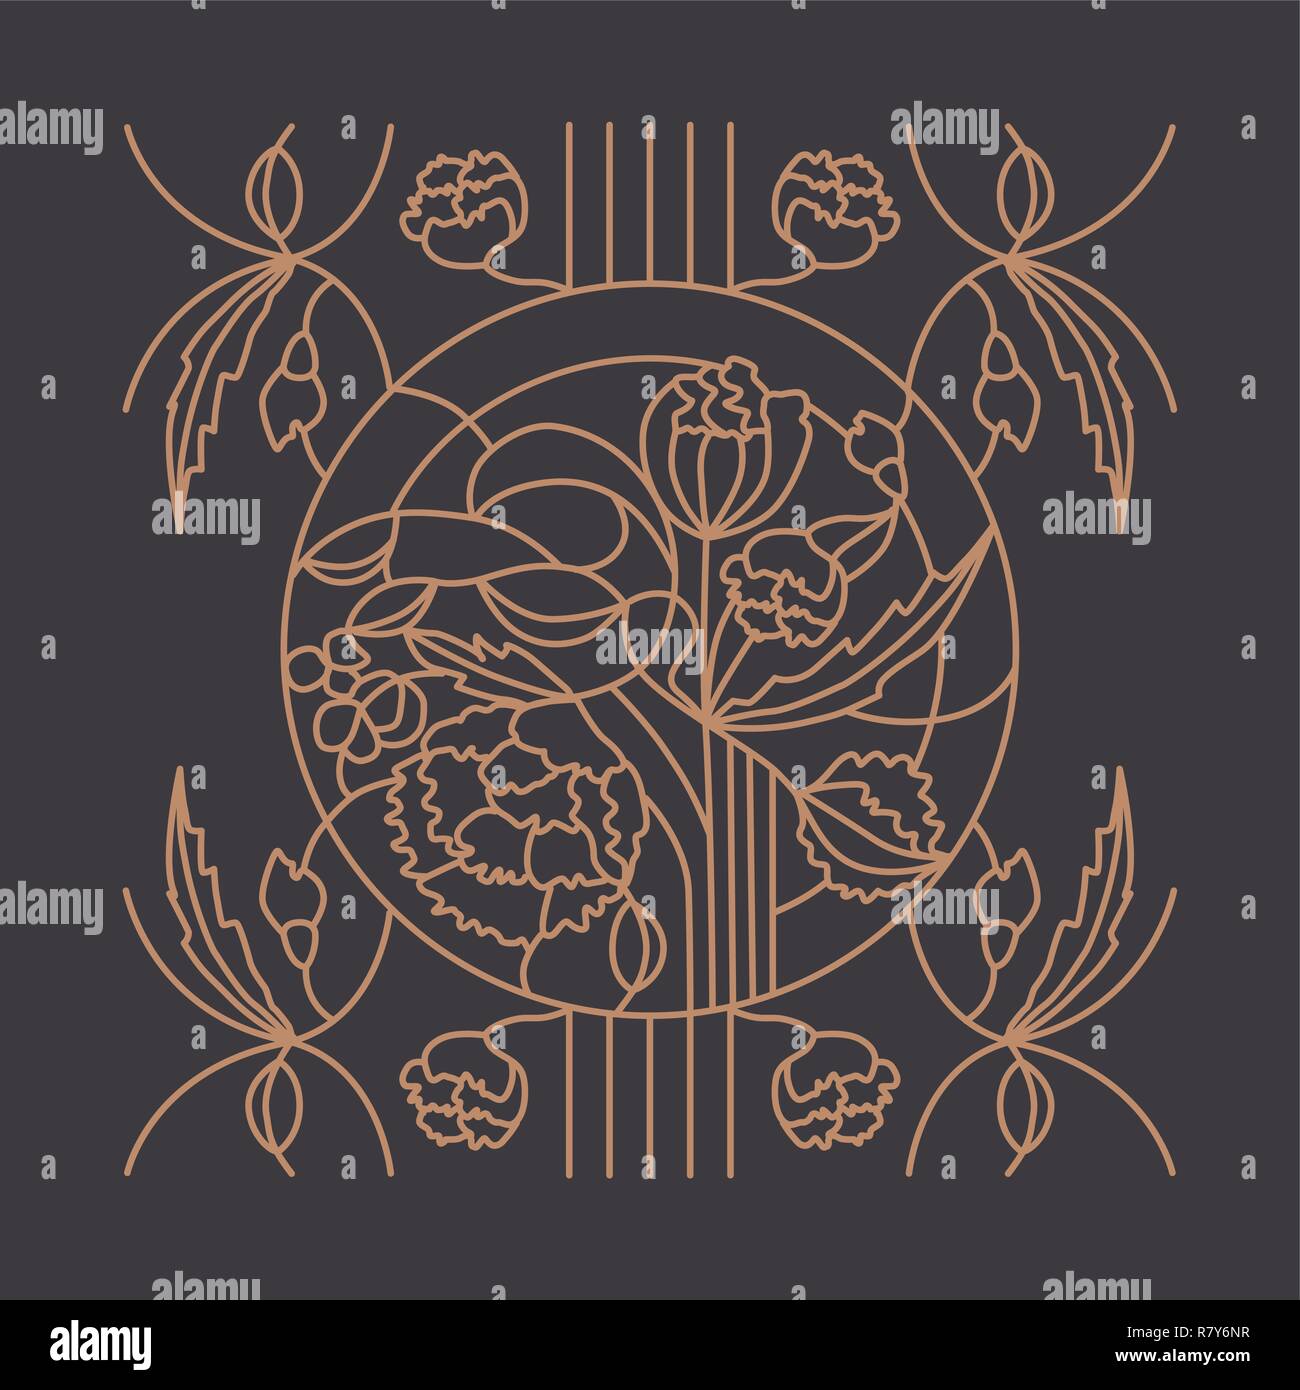 Gold floral ornament on dark background for stained glass window in the Modern style, could be use for tattoo, coloring book, iron window lattices. Stock Vector